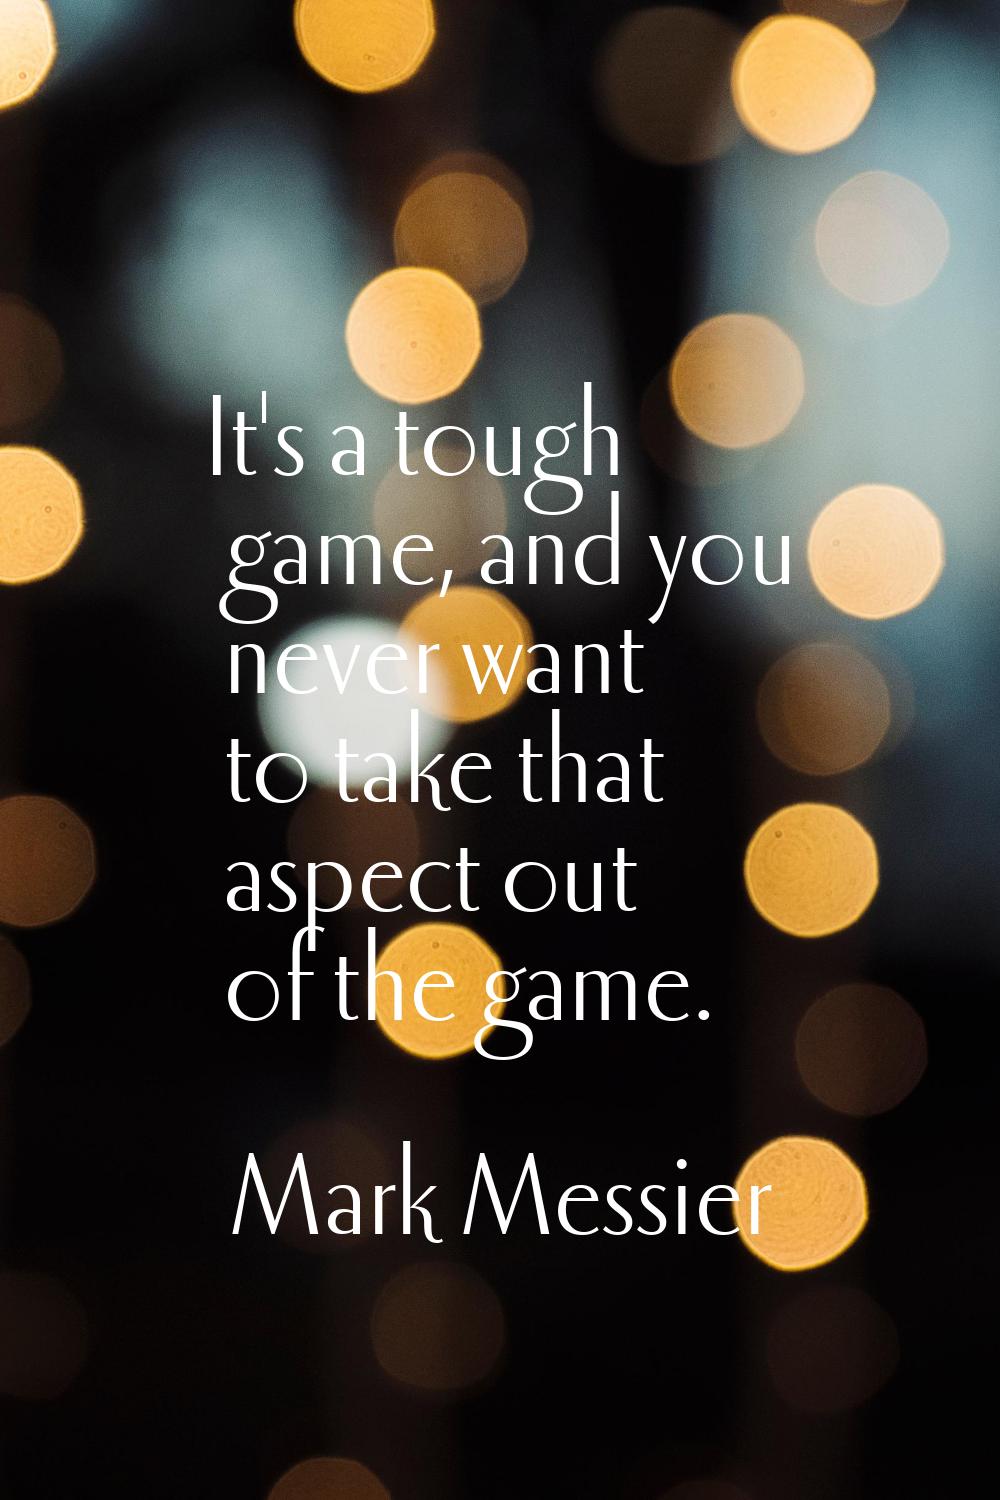 It's a tough game, and you never want to take that aspect out of the game.